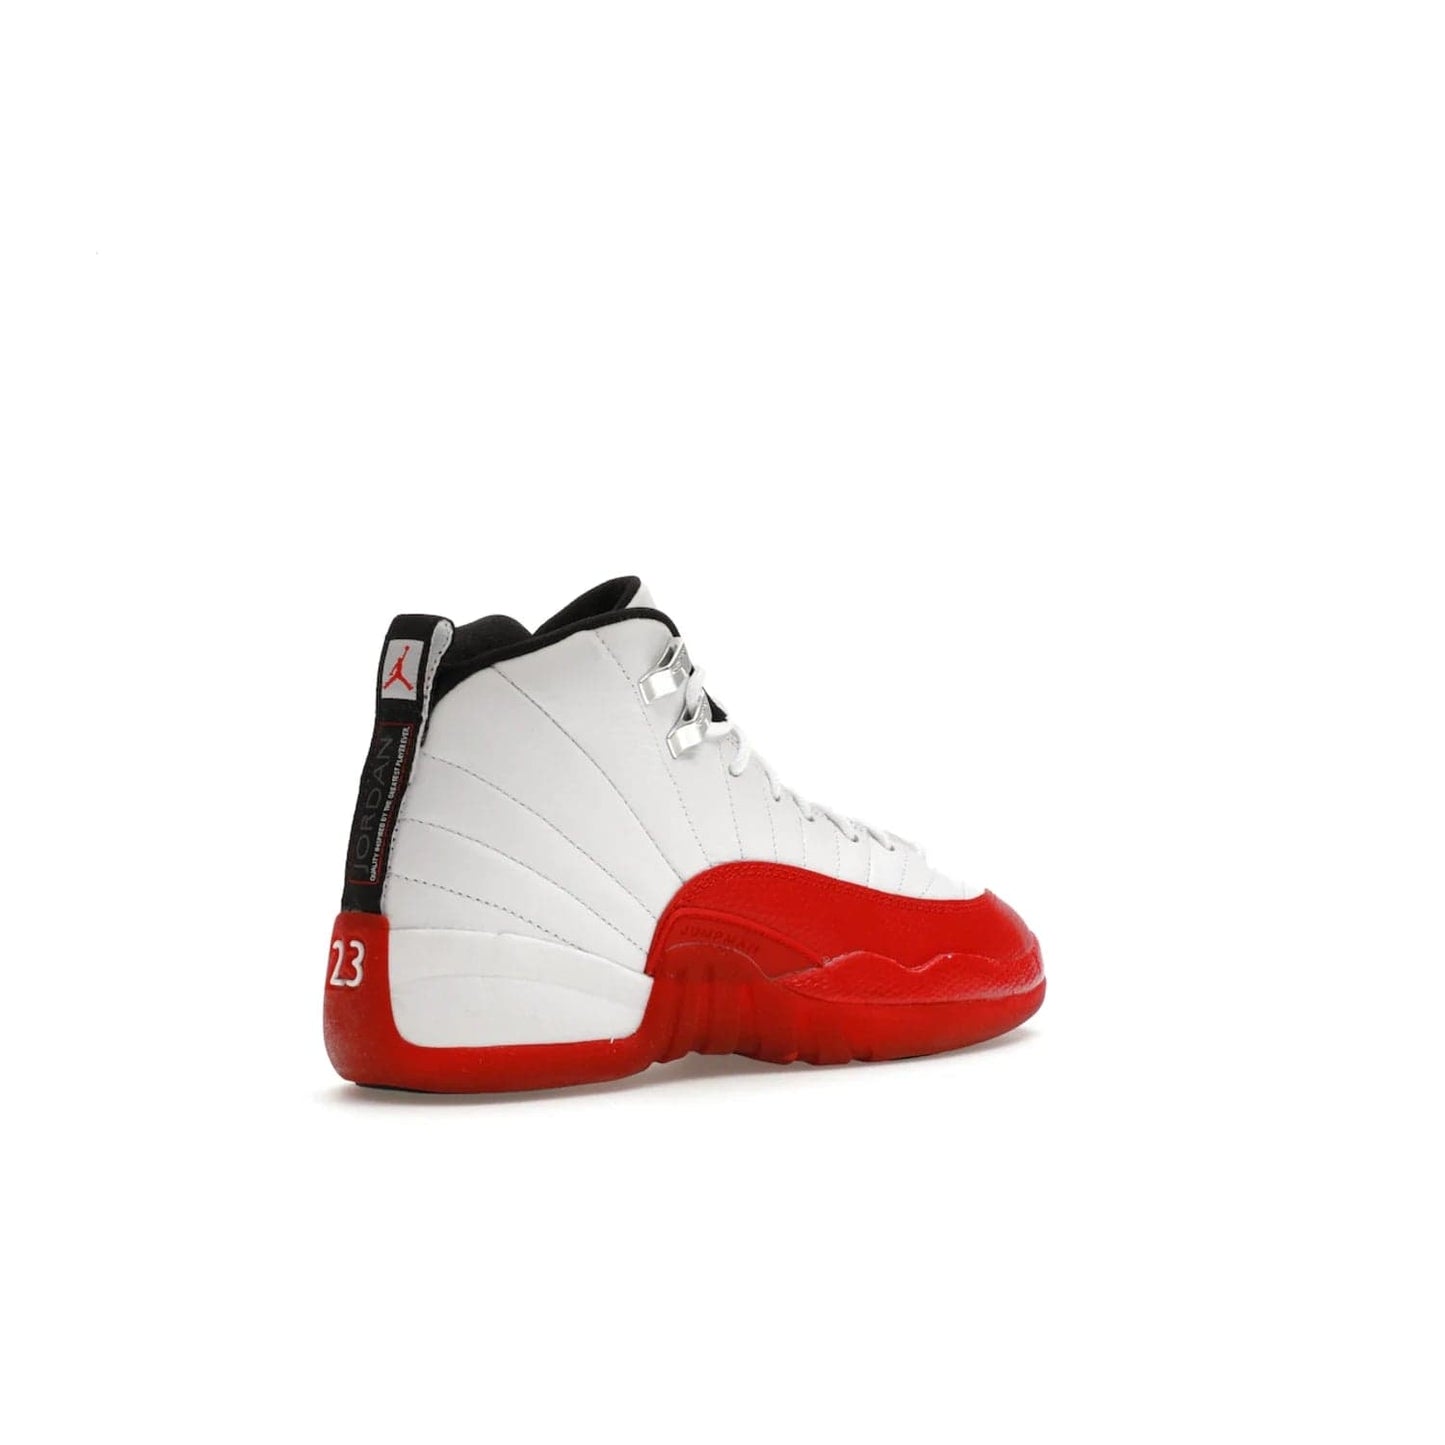 Jordan 12 Retro Cherry (2023) (GS) - Image 33 - Only at www.BallersClubKickz.com - Grab the Jordan 12 Retro Cherry (2023) (GS) and show off your signature style with these iconic kicks. Dressed in White, Black and Varsity Red, these timeless kicks are sure to turn heads. Available October 28, 2023.